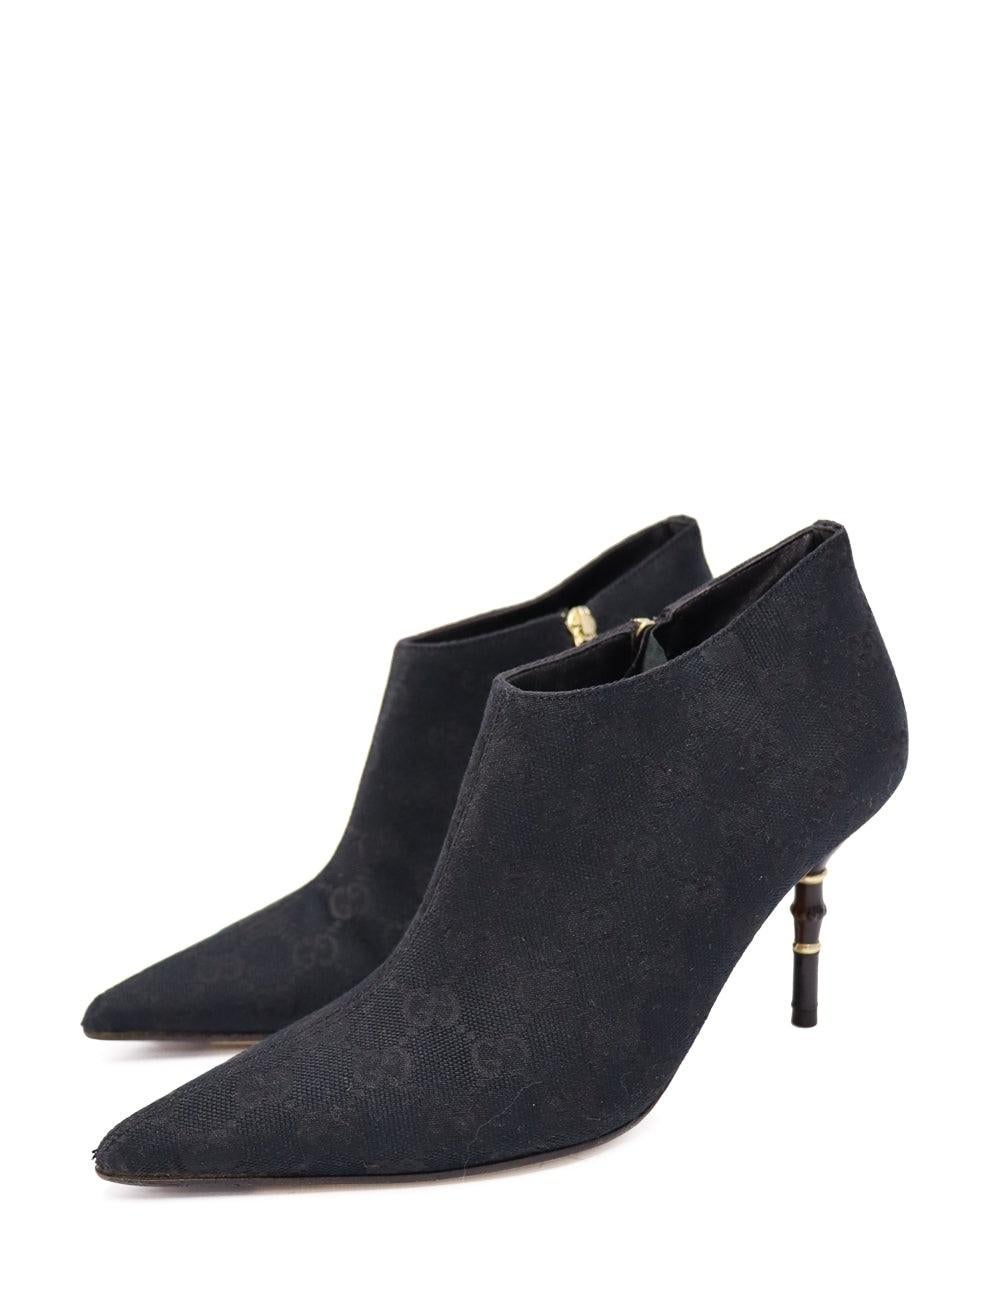 Gucci Black Vintage Monogram Pointed Toe Ankle Boots, Features a Bamboo Detailing on the Heel.

Additional information:
Material: Canvas 
Size: EU 36.5
Measurements: Heel: 8 cm 
Overall condition: Good 
Interior Condition: signs of use
Exterior